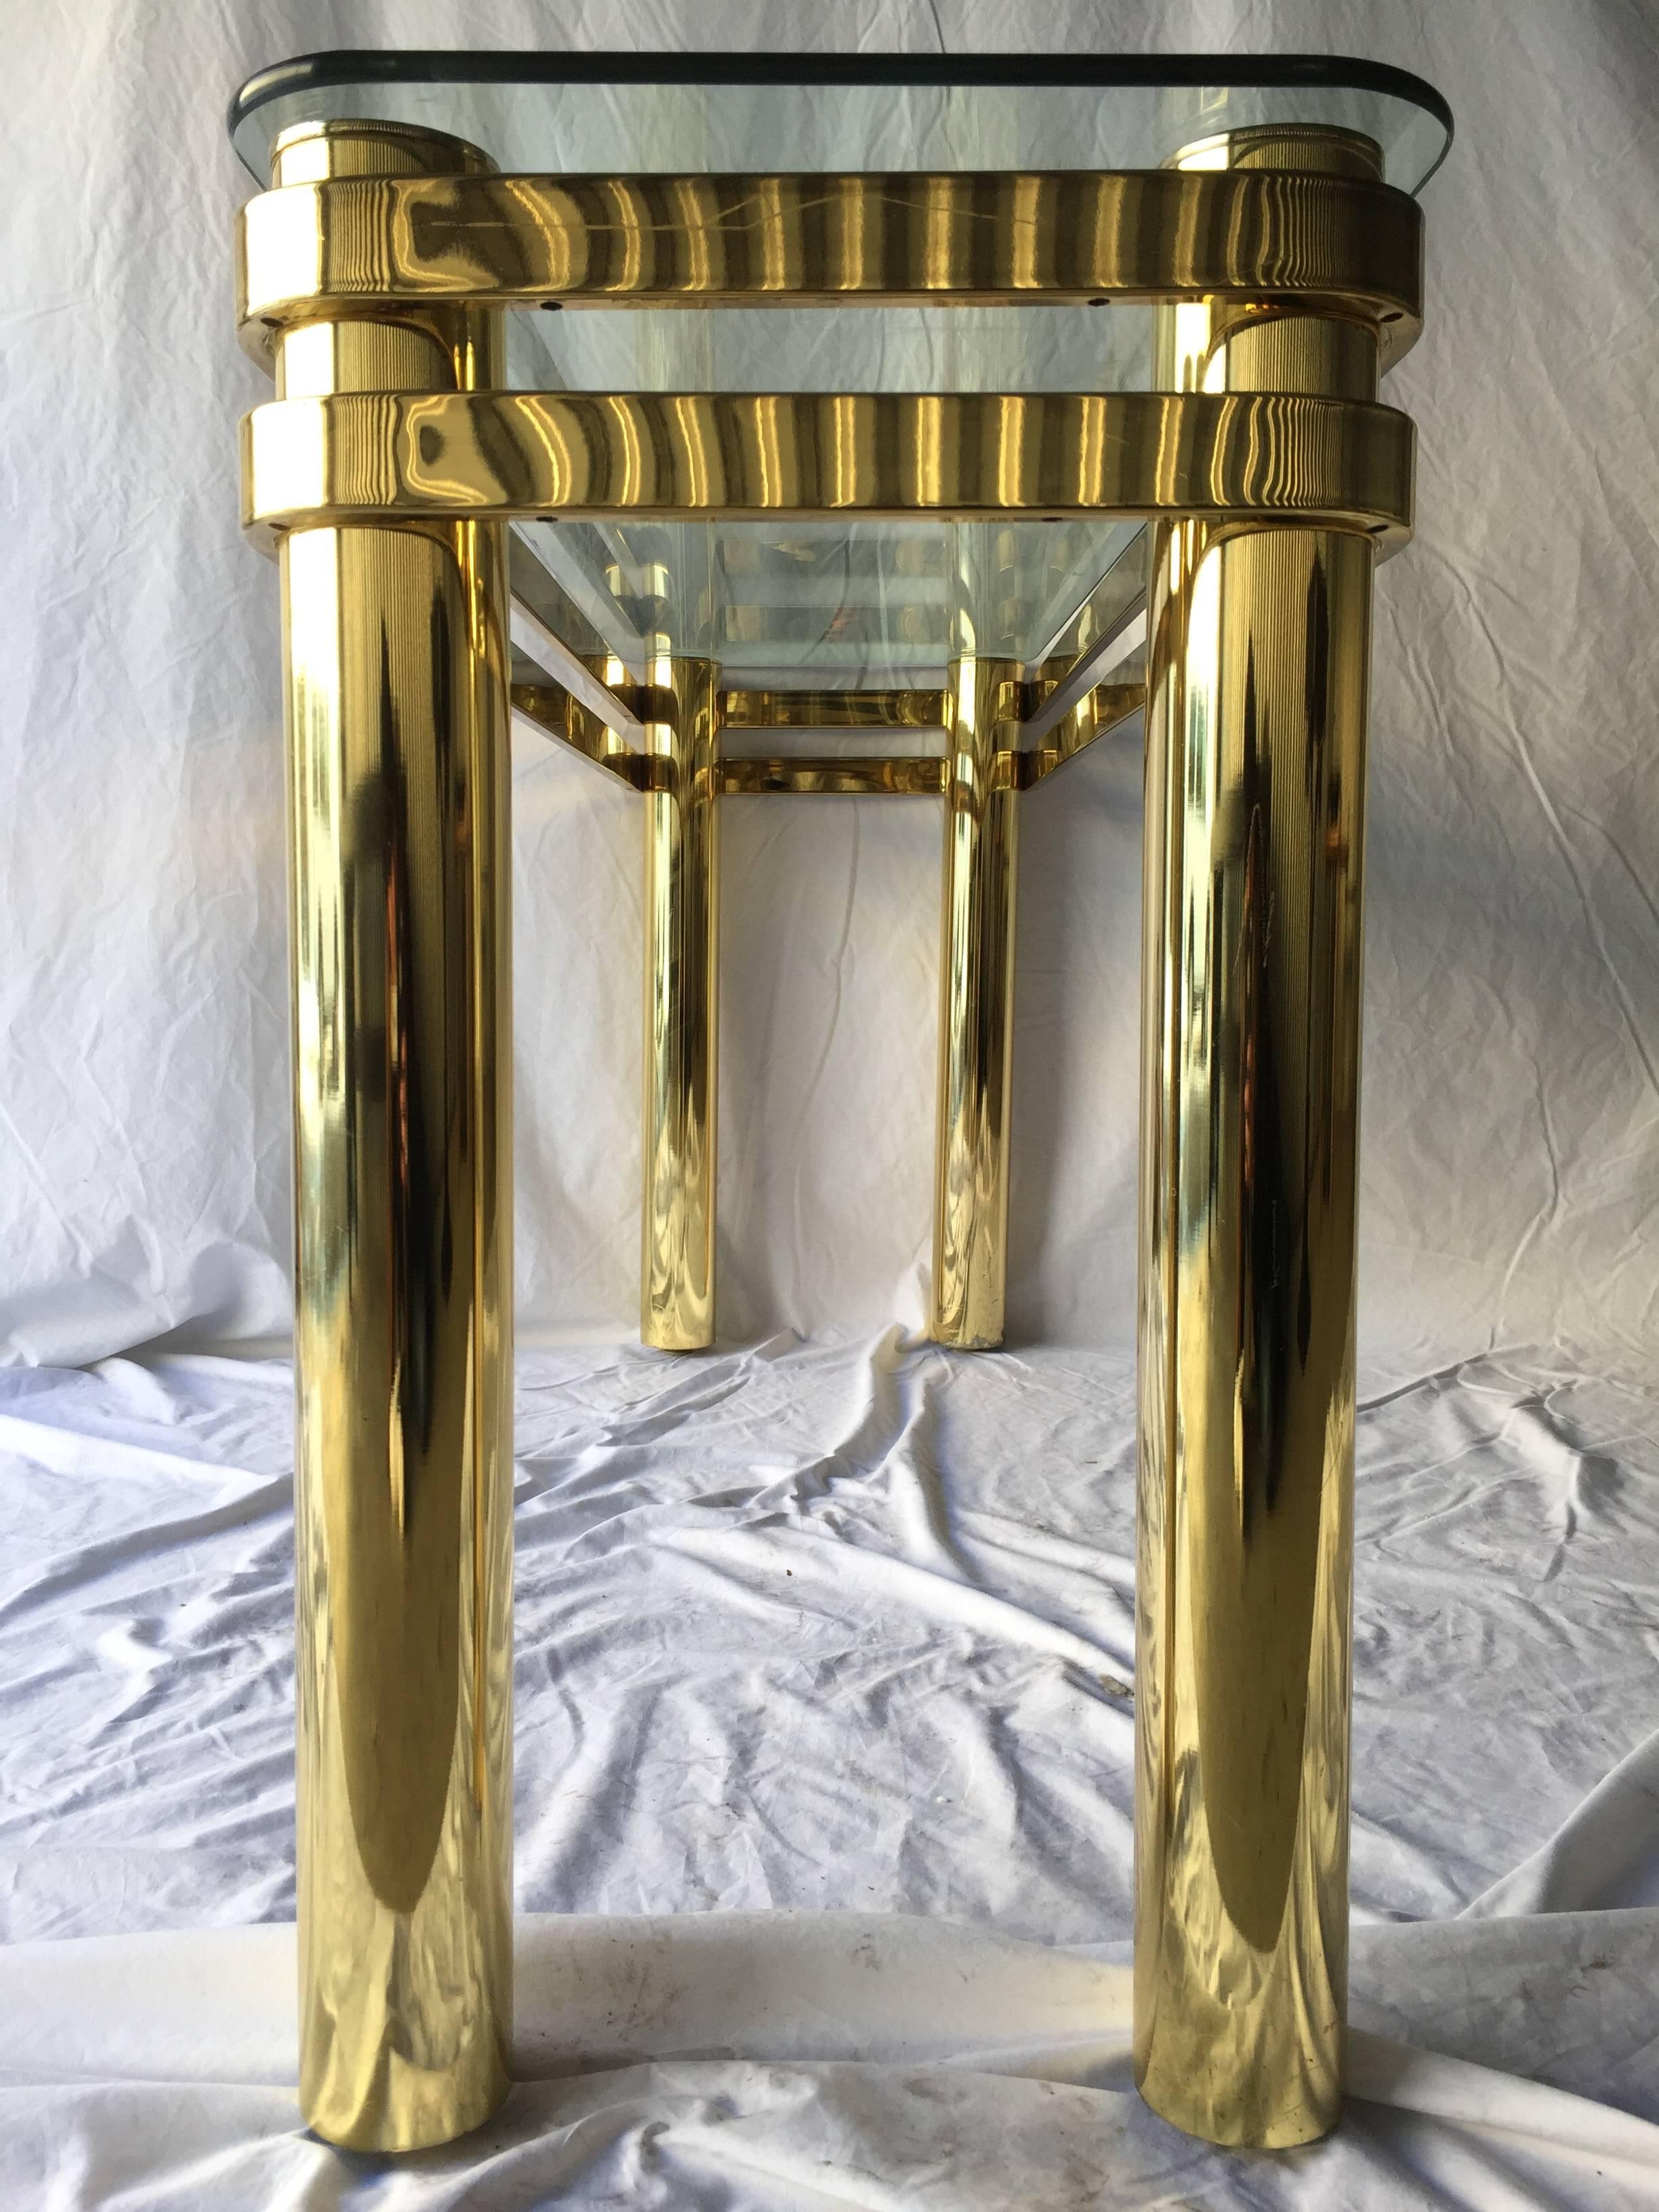 You know this one. It's a Classic. Oh so 1970s. And I had to throw in that tubular reference. Remember that one? It's, like, so totally tubular (said with a Valley Girl accent). This vintage brass console table will look amazing in your Scarface